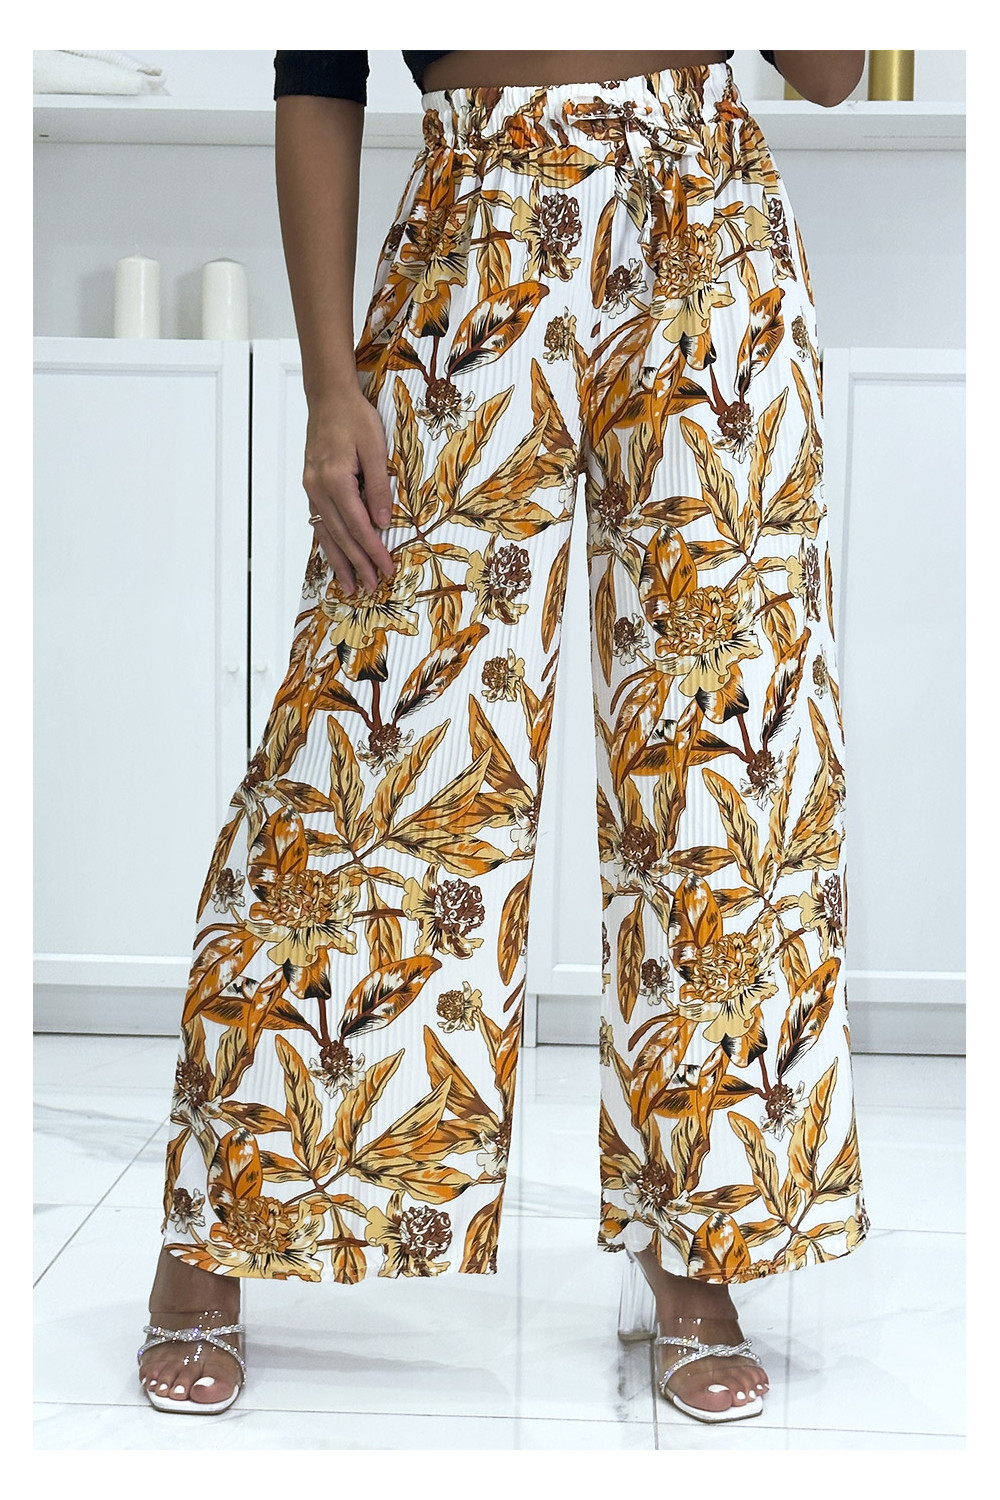 Orange pleated palazzo pants with floral pattern